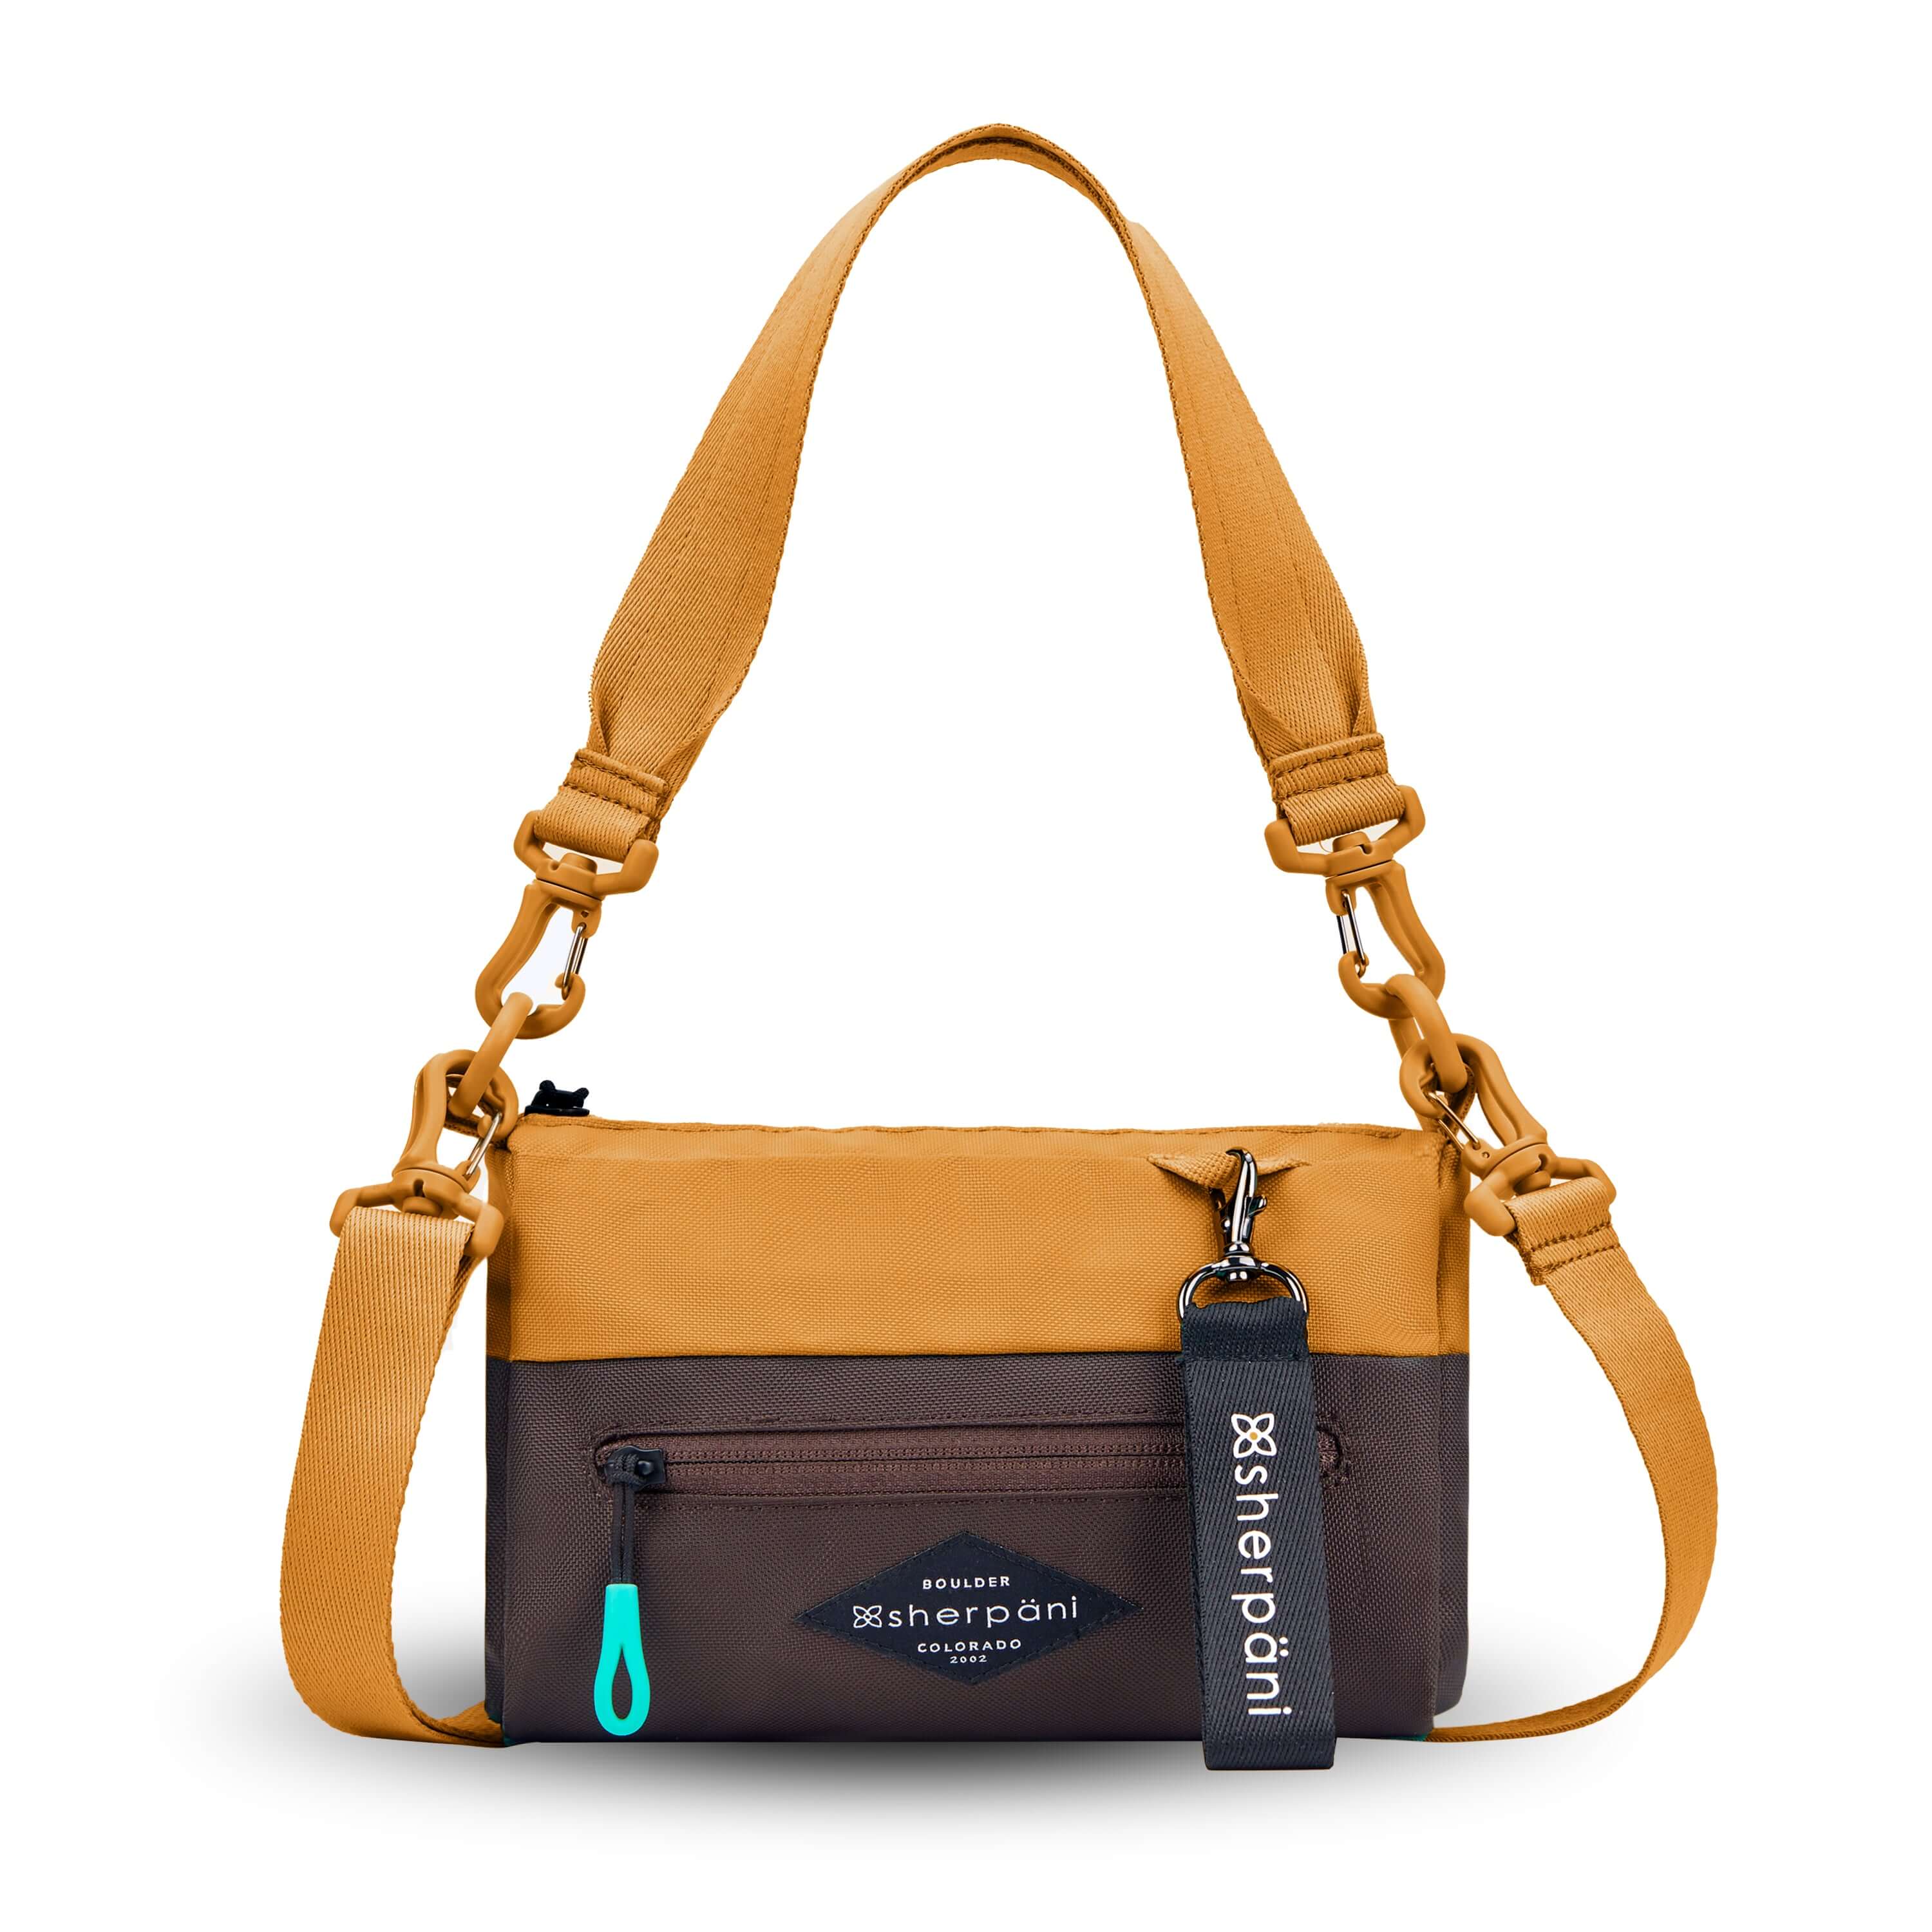 Flat front view of Sherpani's purse, the Skye in Sundial. It is two toned, the top half of the bag is burnt yellow and the bottom half of the bag is brown. There is an external zipper compartment with an easy pull zipper accented in aqua. There is a branded Sherpani keychain clipped to the upper right corner. The bag has a detachable short strap and a longer detachable/adjustable crossbody strap. 